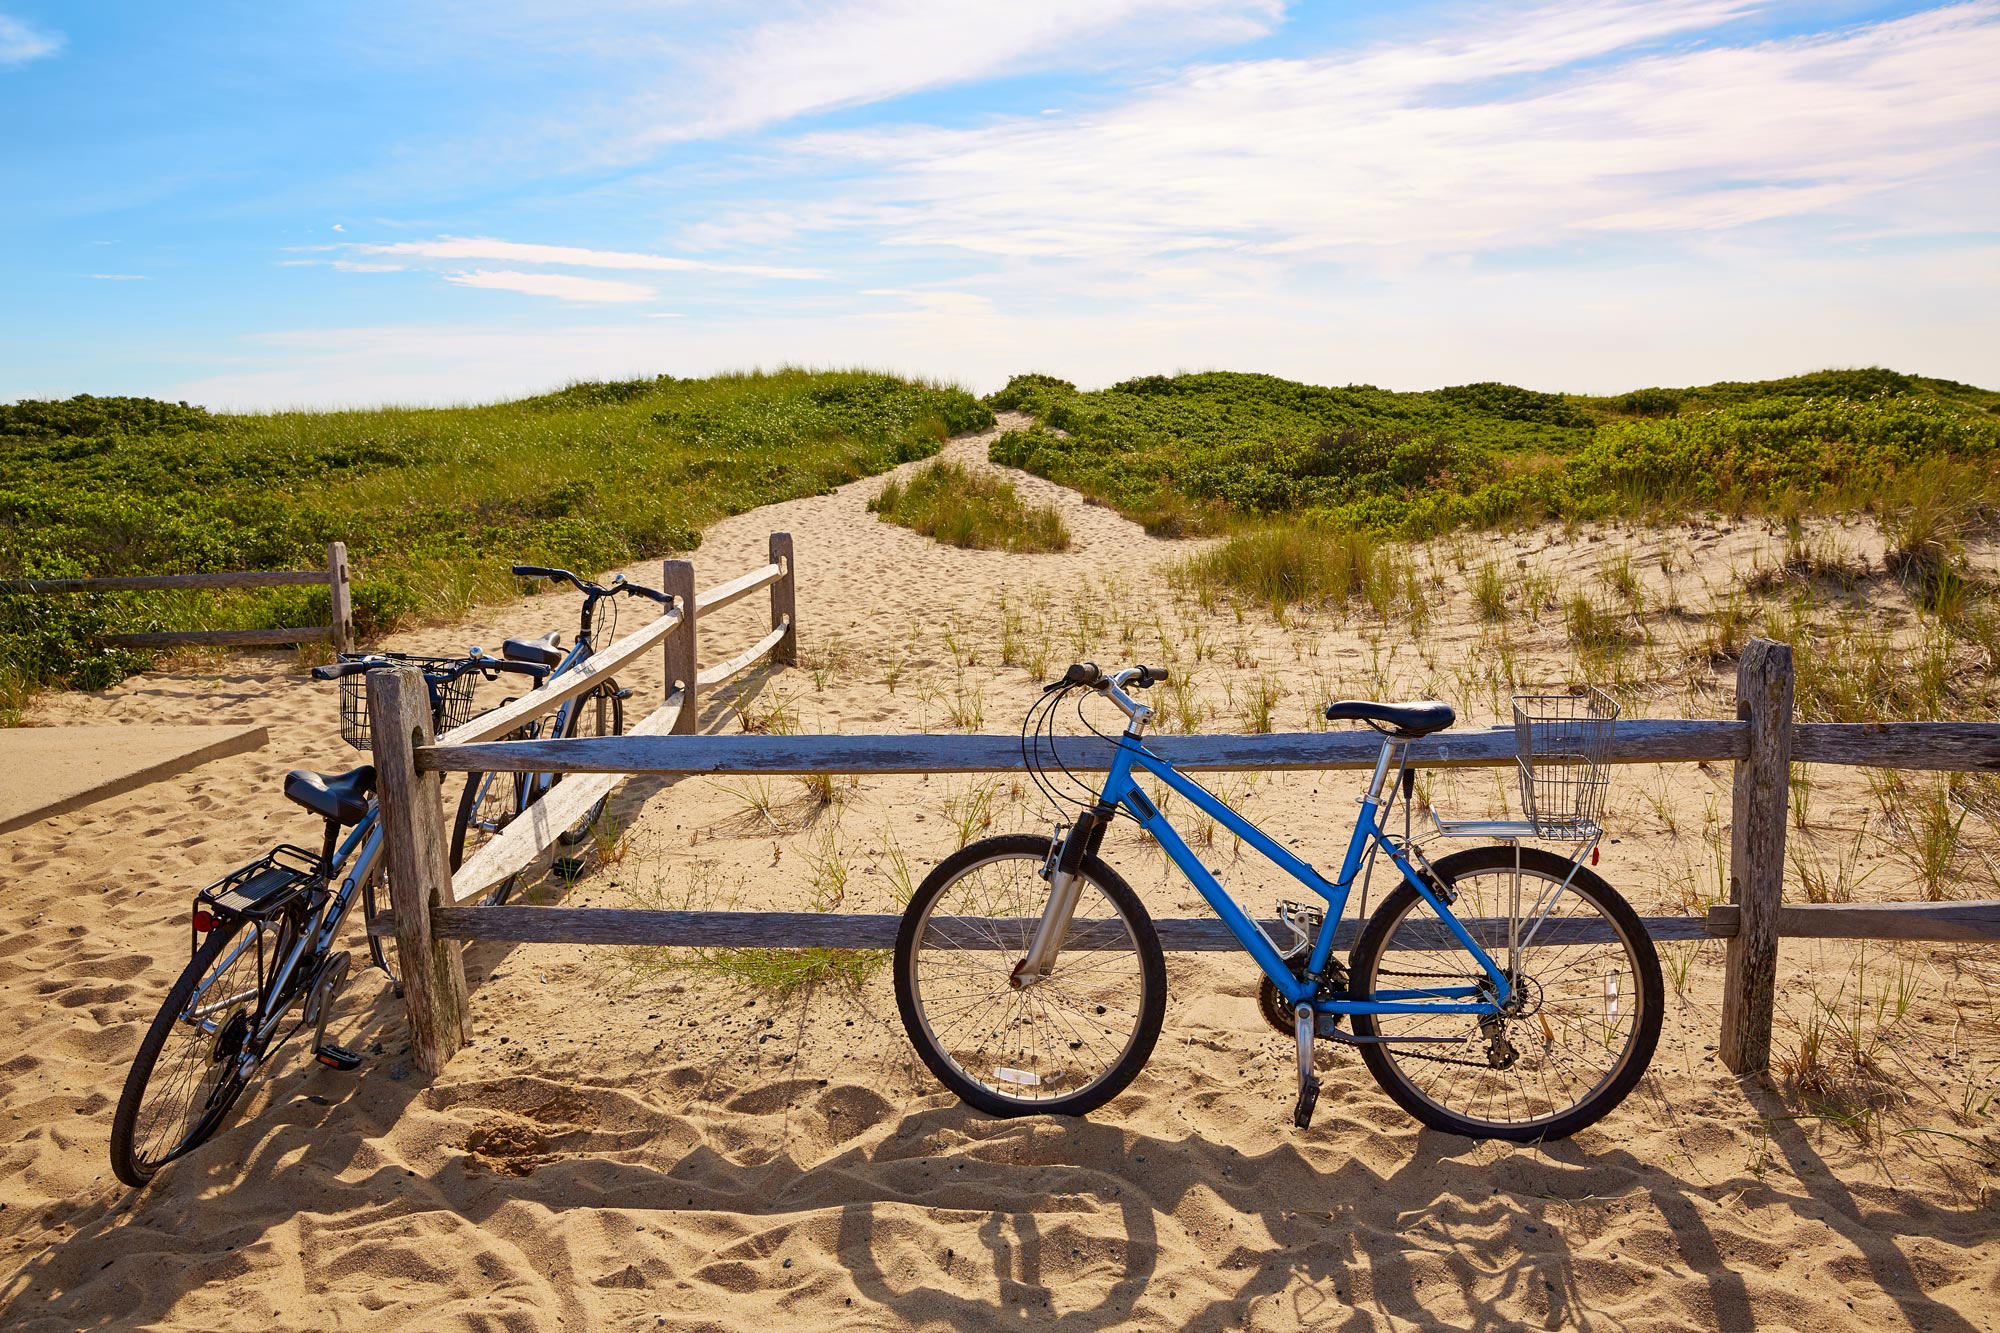 Two bikes leaning on a weathered fence in the dunes